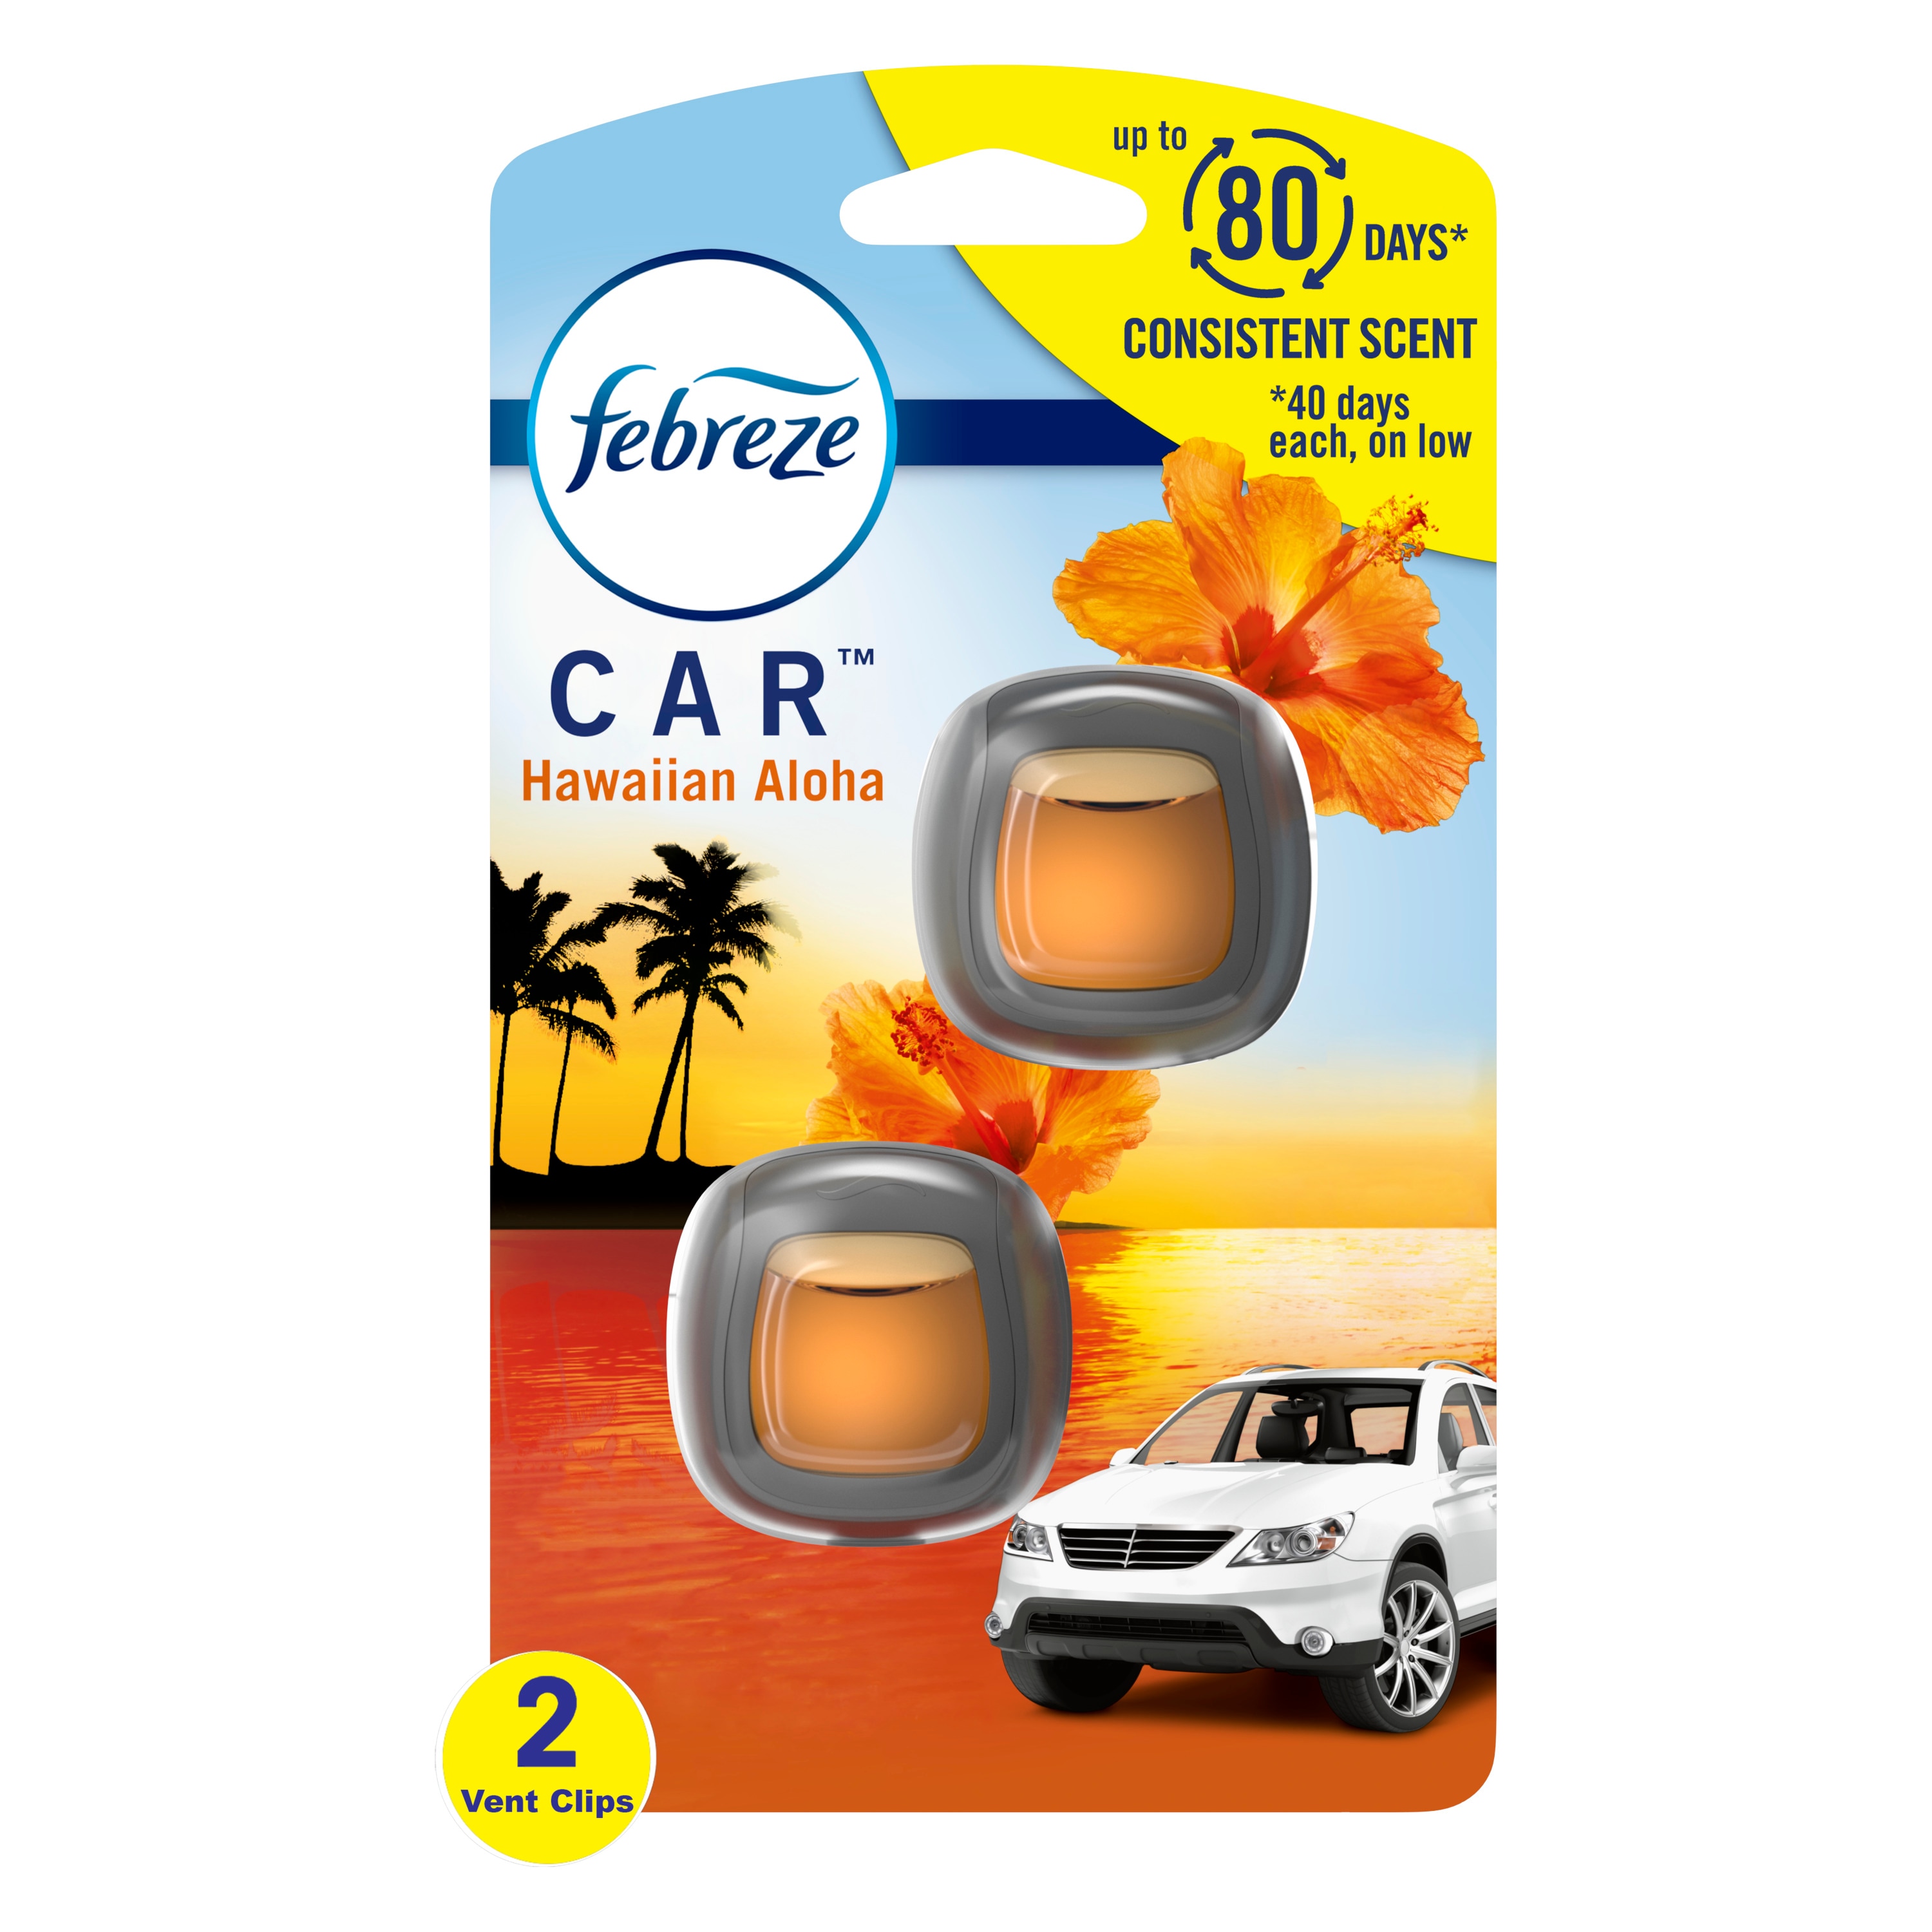 Febreze Car Air Freshener, Set of 5 Clips, Linen & Sky - up to 150 Days -  NEW 